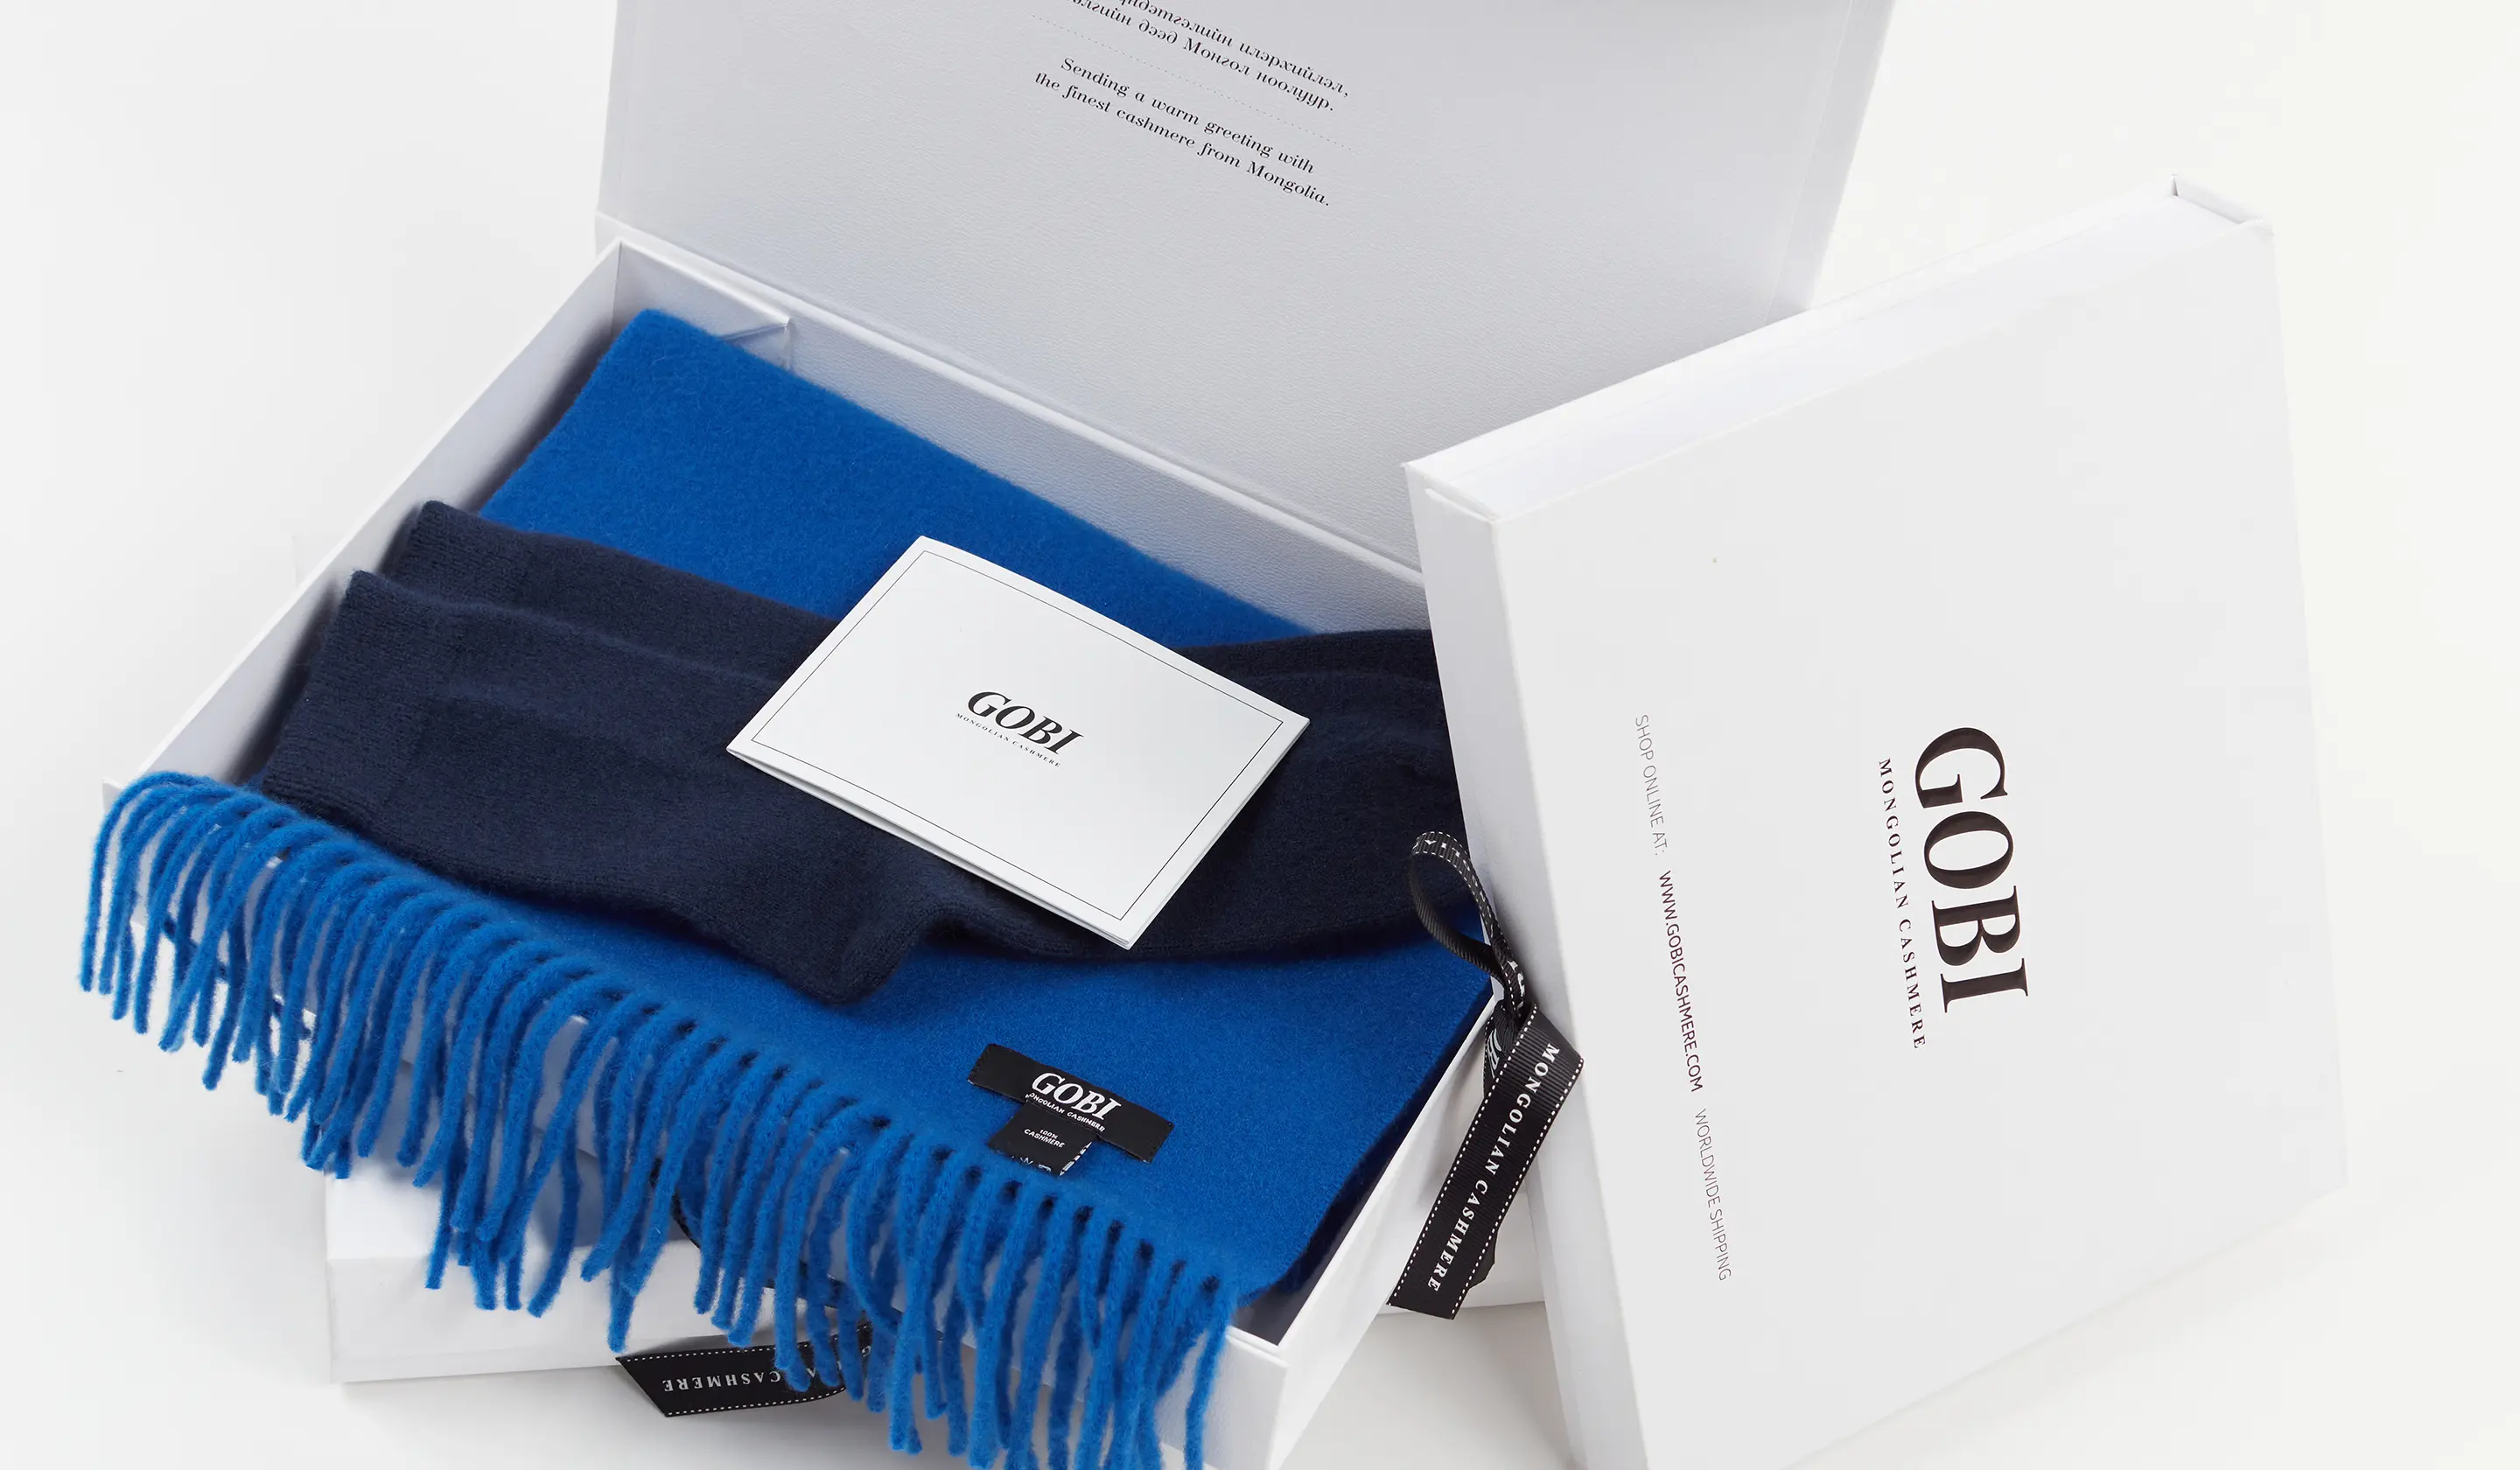 The Gift of Cashmere